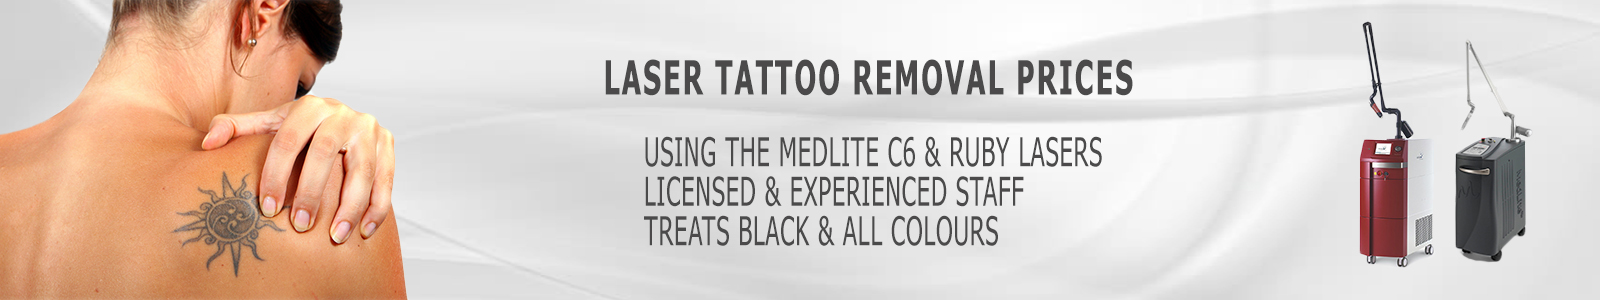 Laser Tattoo Removal Prices